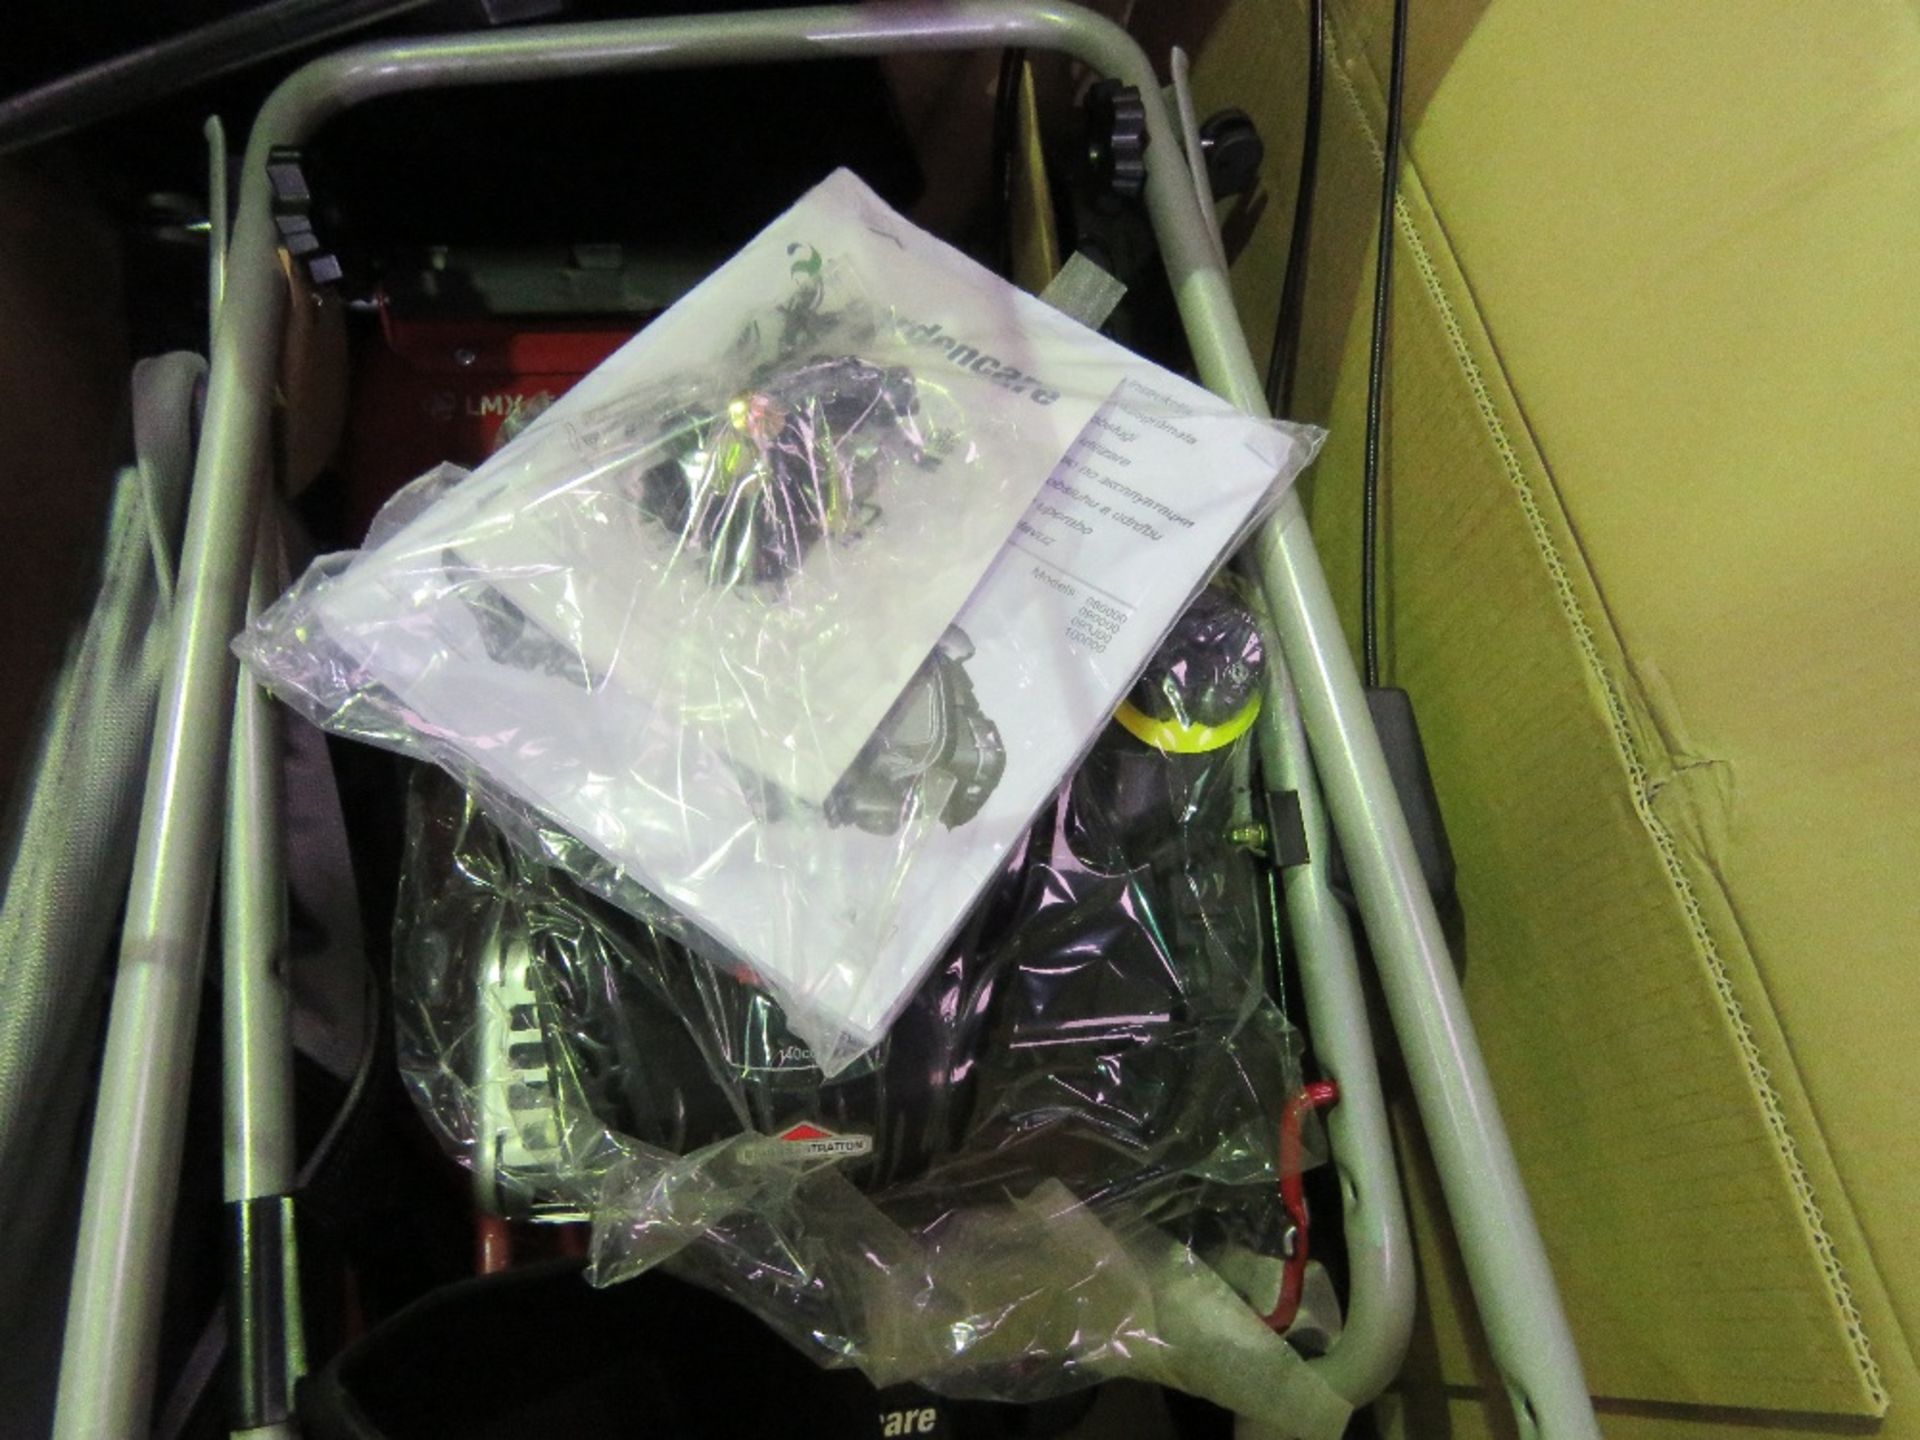 GARDENCARE LMX46 LAWNMOWER. BOXED, UNUSED, DIRECT FROM LOCAL COMPANY BEING SURPLUS STOCK. - Image 5 of 5